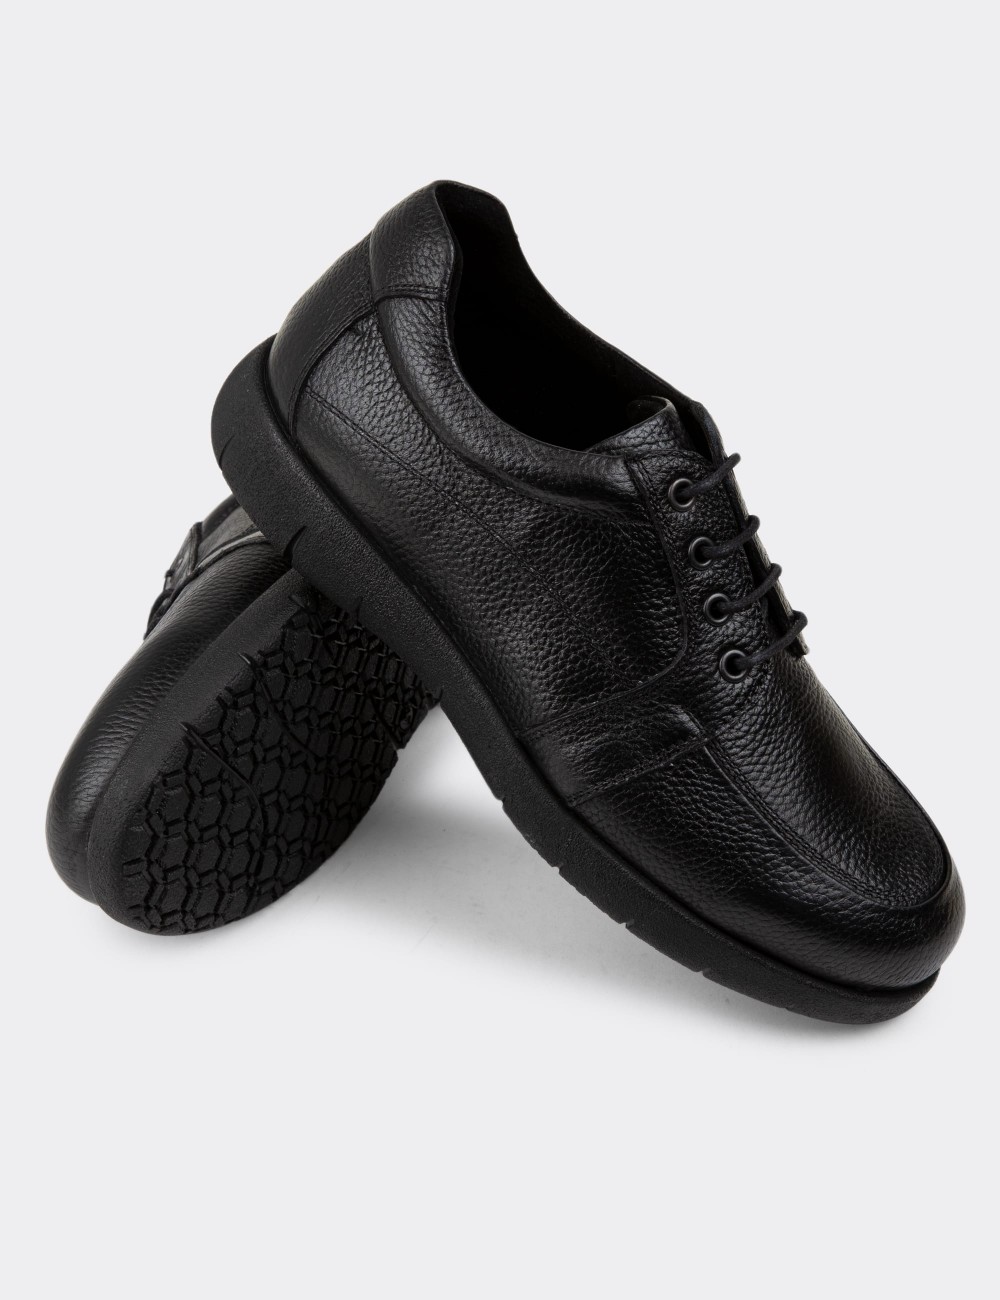 Black Leather Lace-up Shoes - 01940MSYHC01